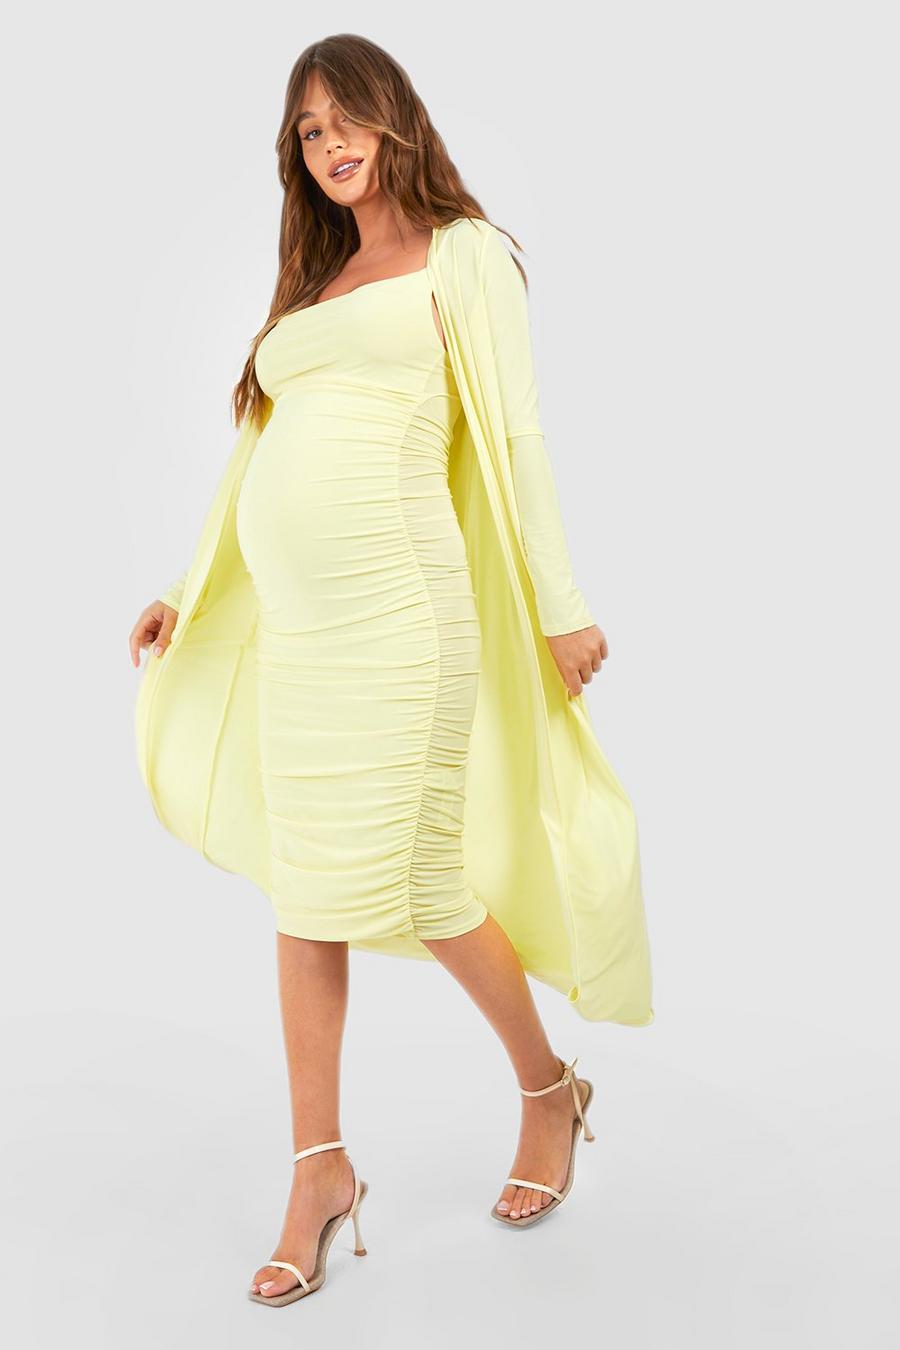 Lemon yellow Maternity Strappy Cowl Neck Dress And Duster Coat